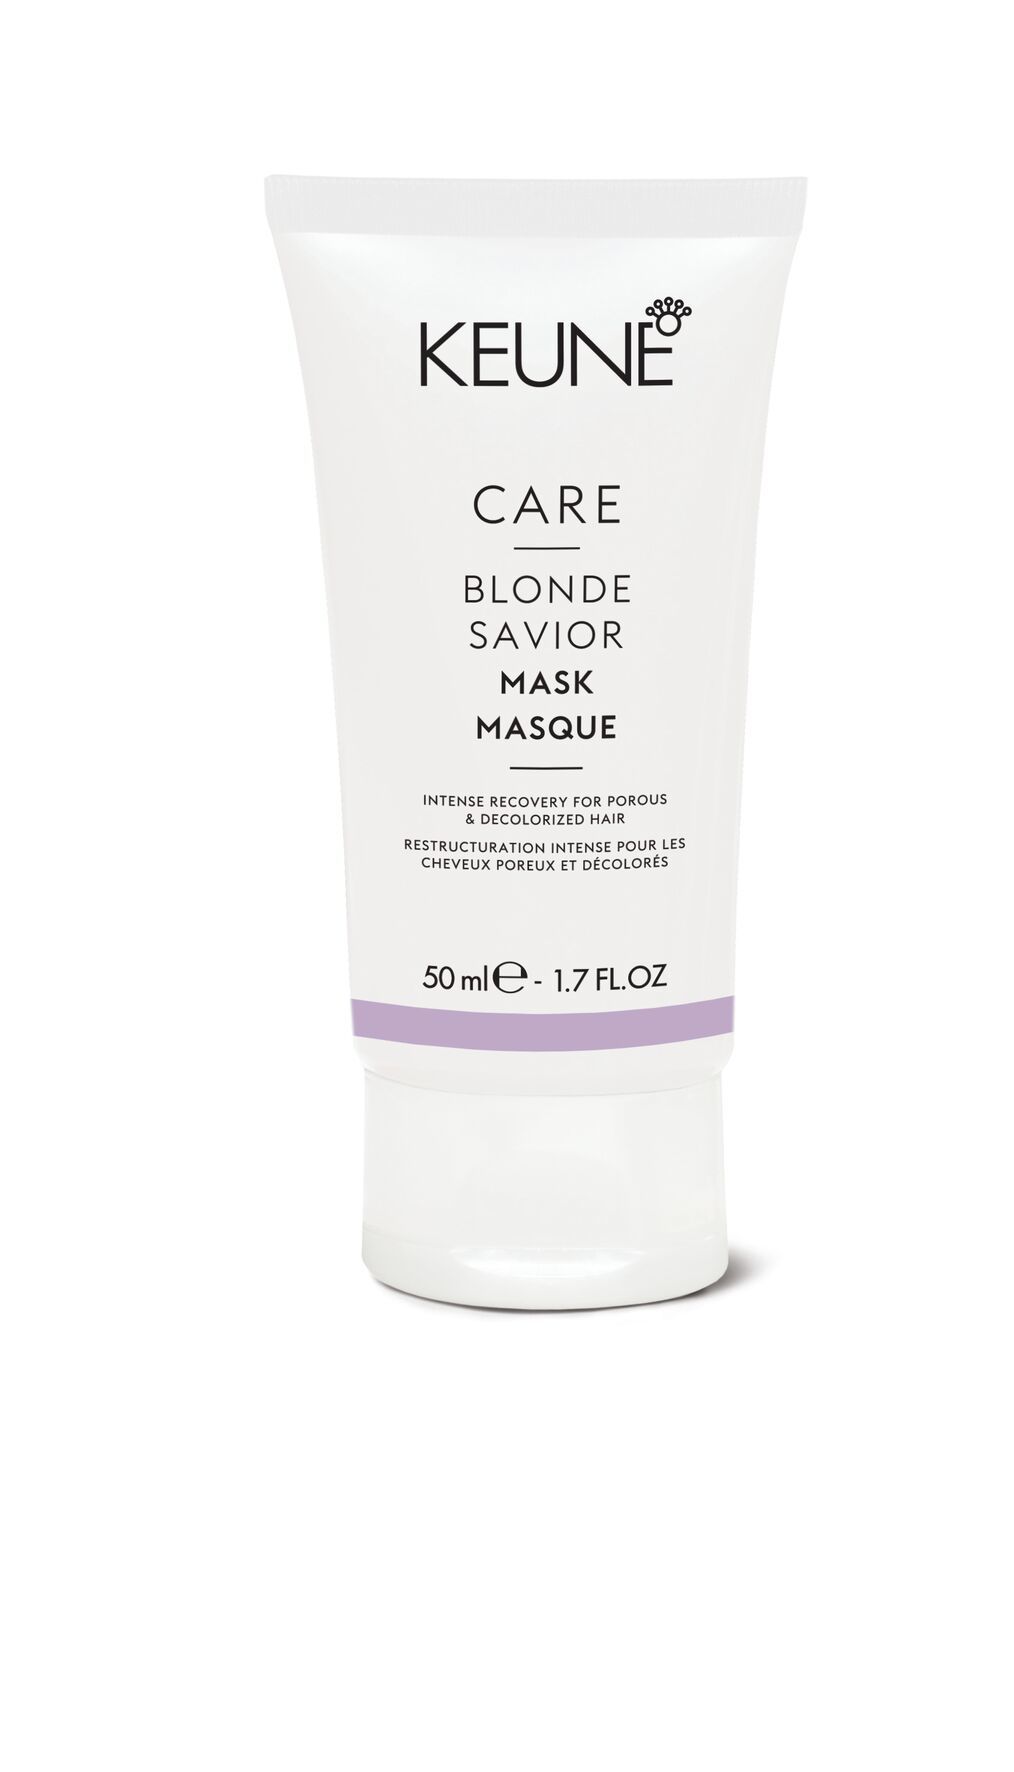 Designed for damaged, bleached hair, the BLONDE SAVIOR MASK is an intensive hair treatment infused with glycolic acid and creatine. Hair mask minimizes hair breakage.